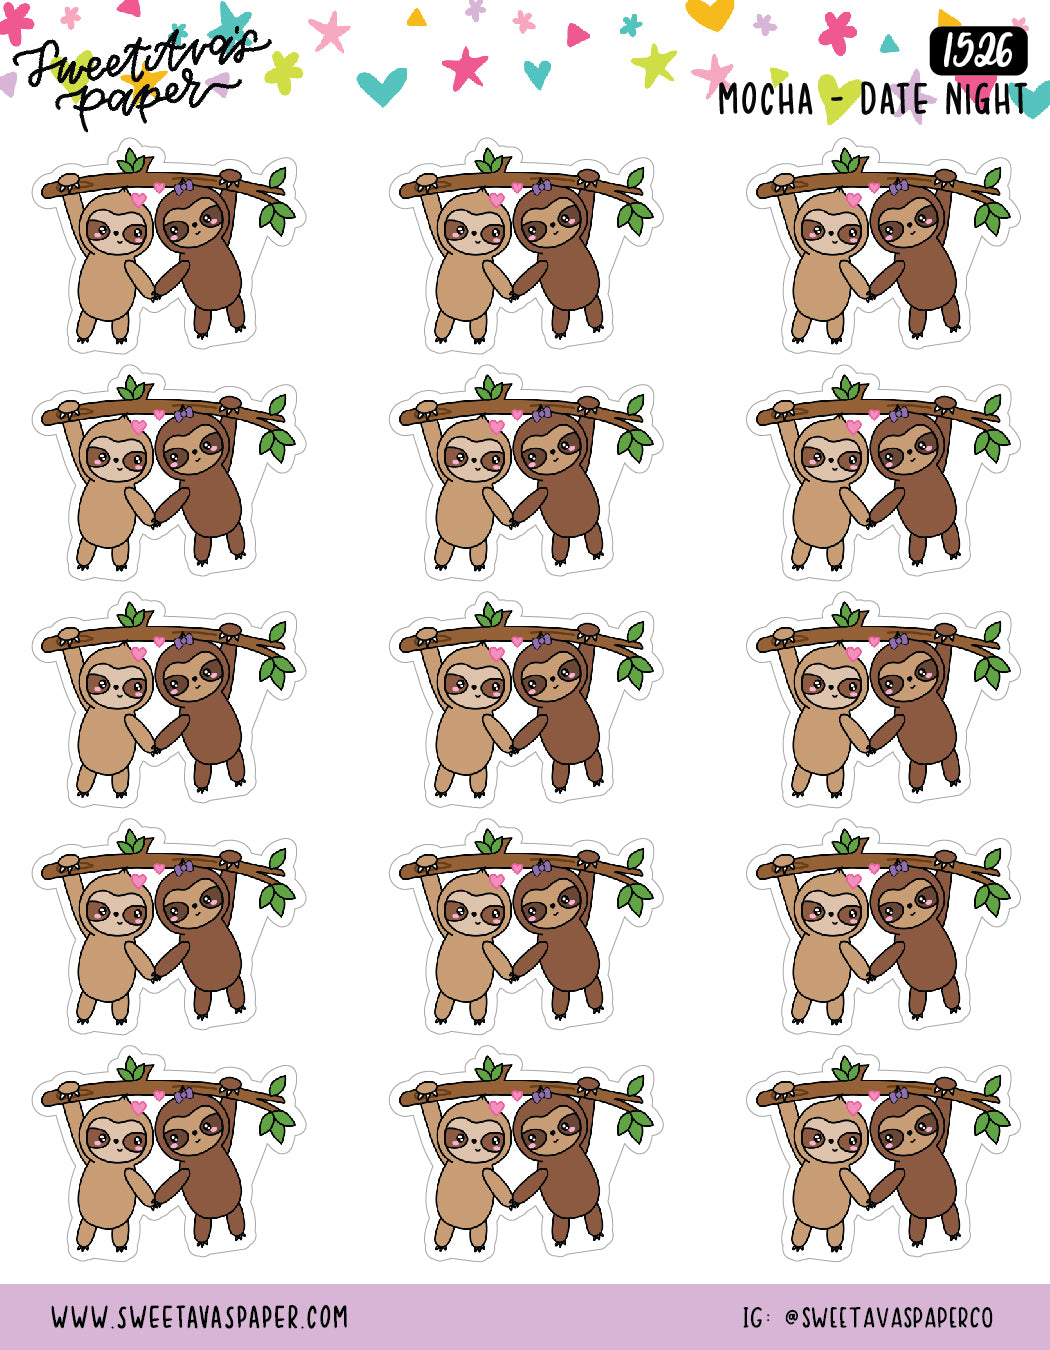 Date Night Planner Stickers - Mocha The Sloth [1526]